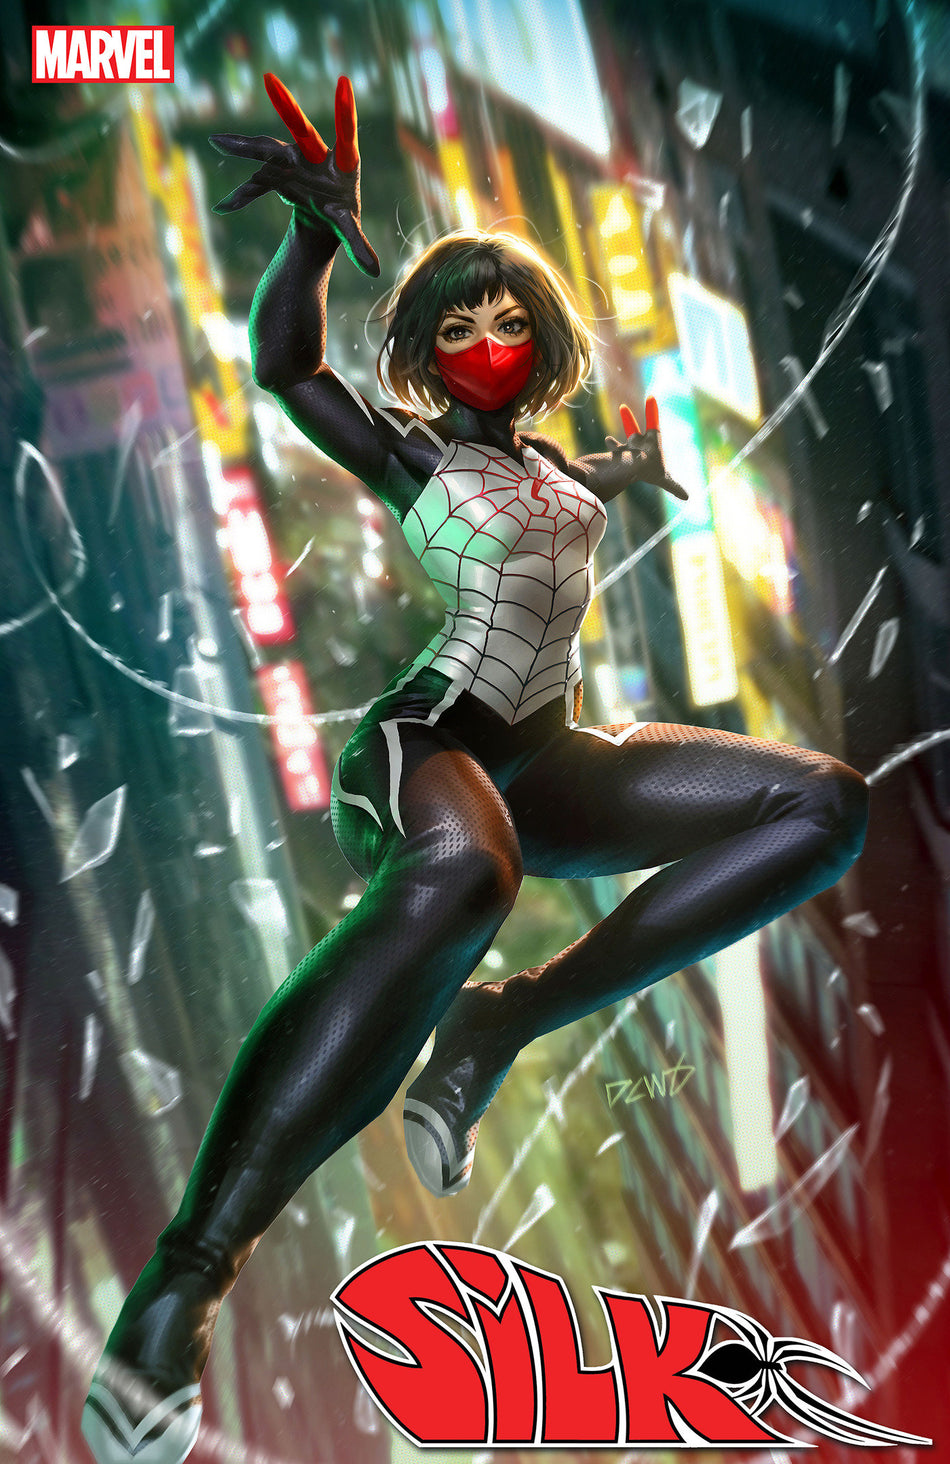 Stock Photo of Silk 1 Derrick Chew Silk Variant comic sold by Stronghold Collectibles